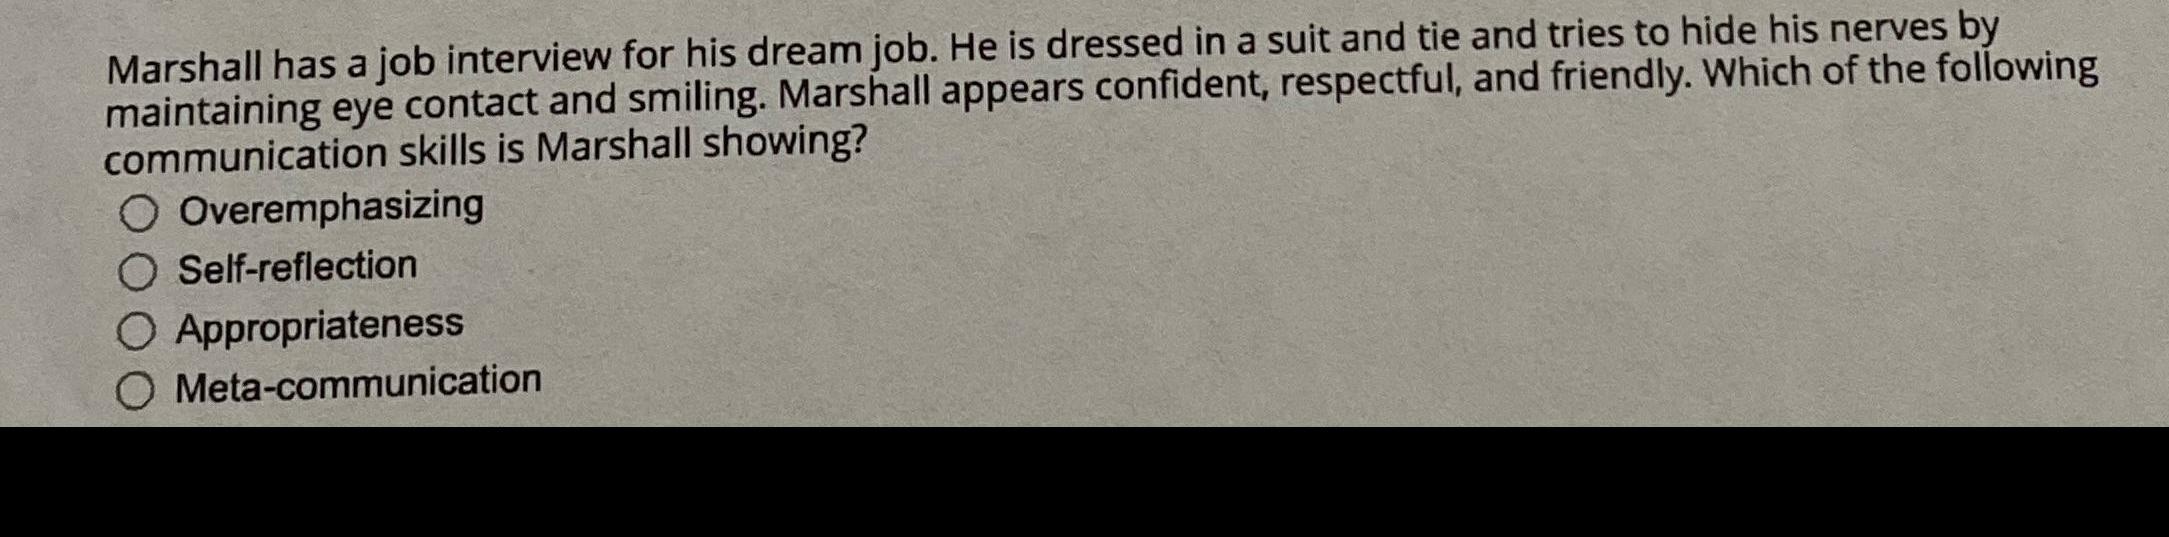 Marshall has a job interview for his dream job. He is dressed in a suit and tie and tries to hide his nerves